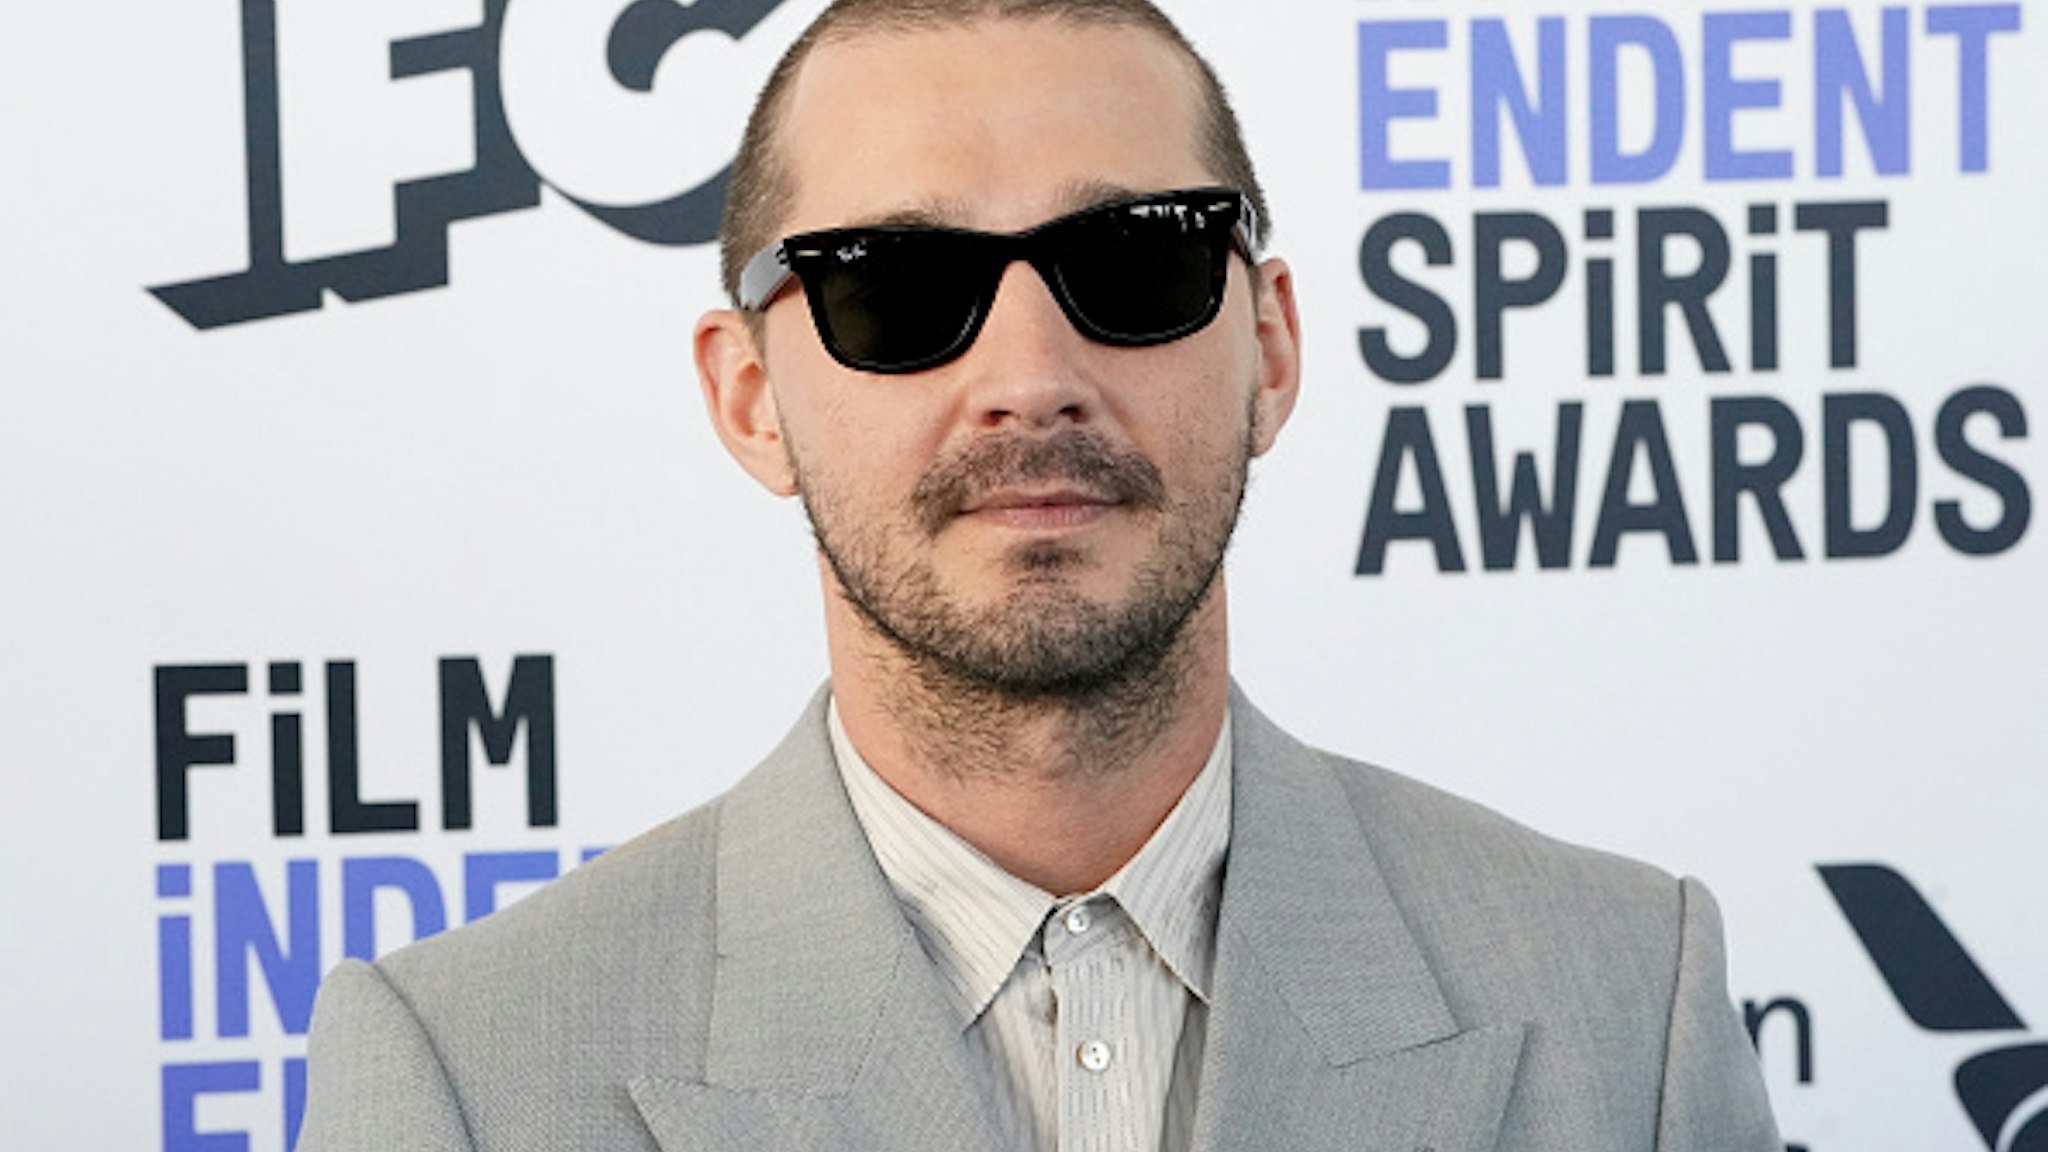 SANTA MONICA, CALIFORNIA - FEBRUARY 08: Shia LaBeouf attends the 2020 Film Independent Spirit Awards on February 08, 2020 in Santa Monica, California.